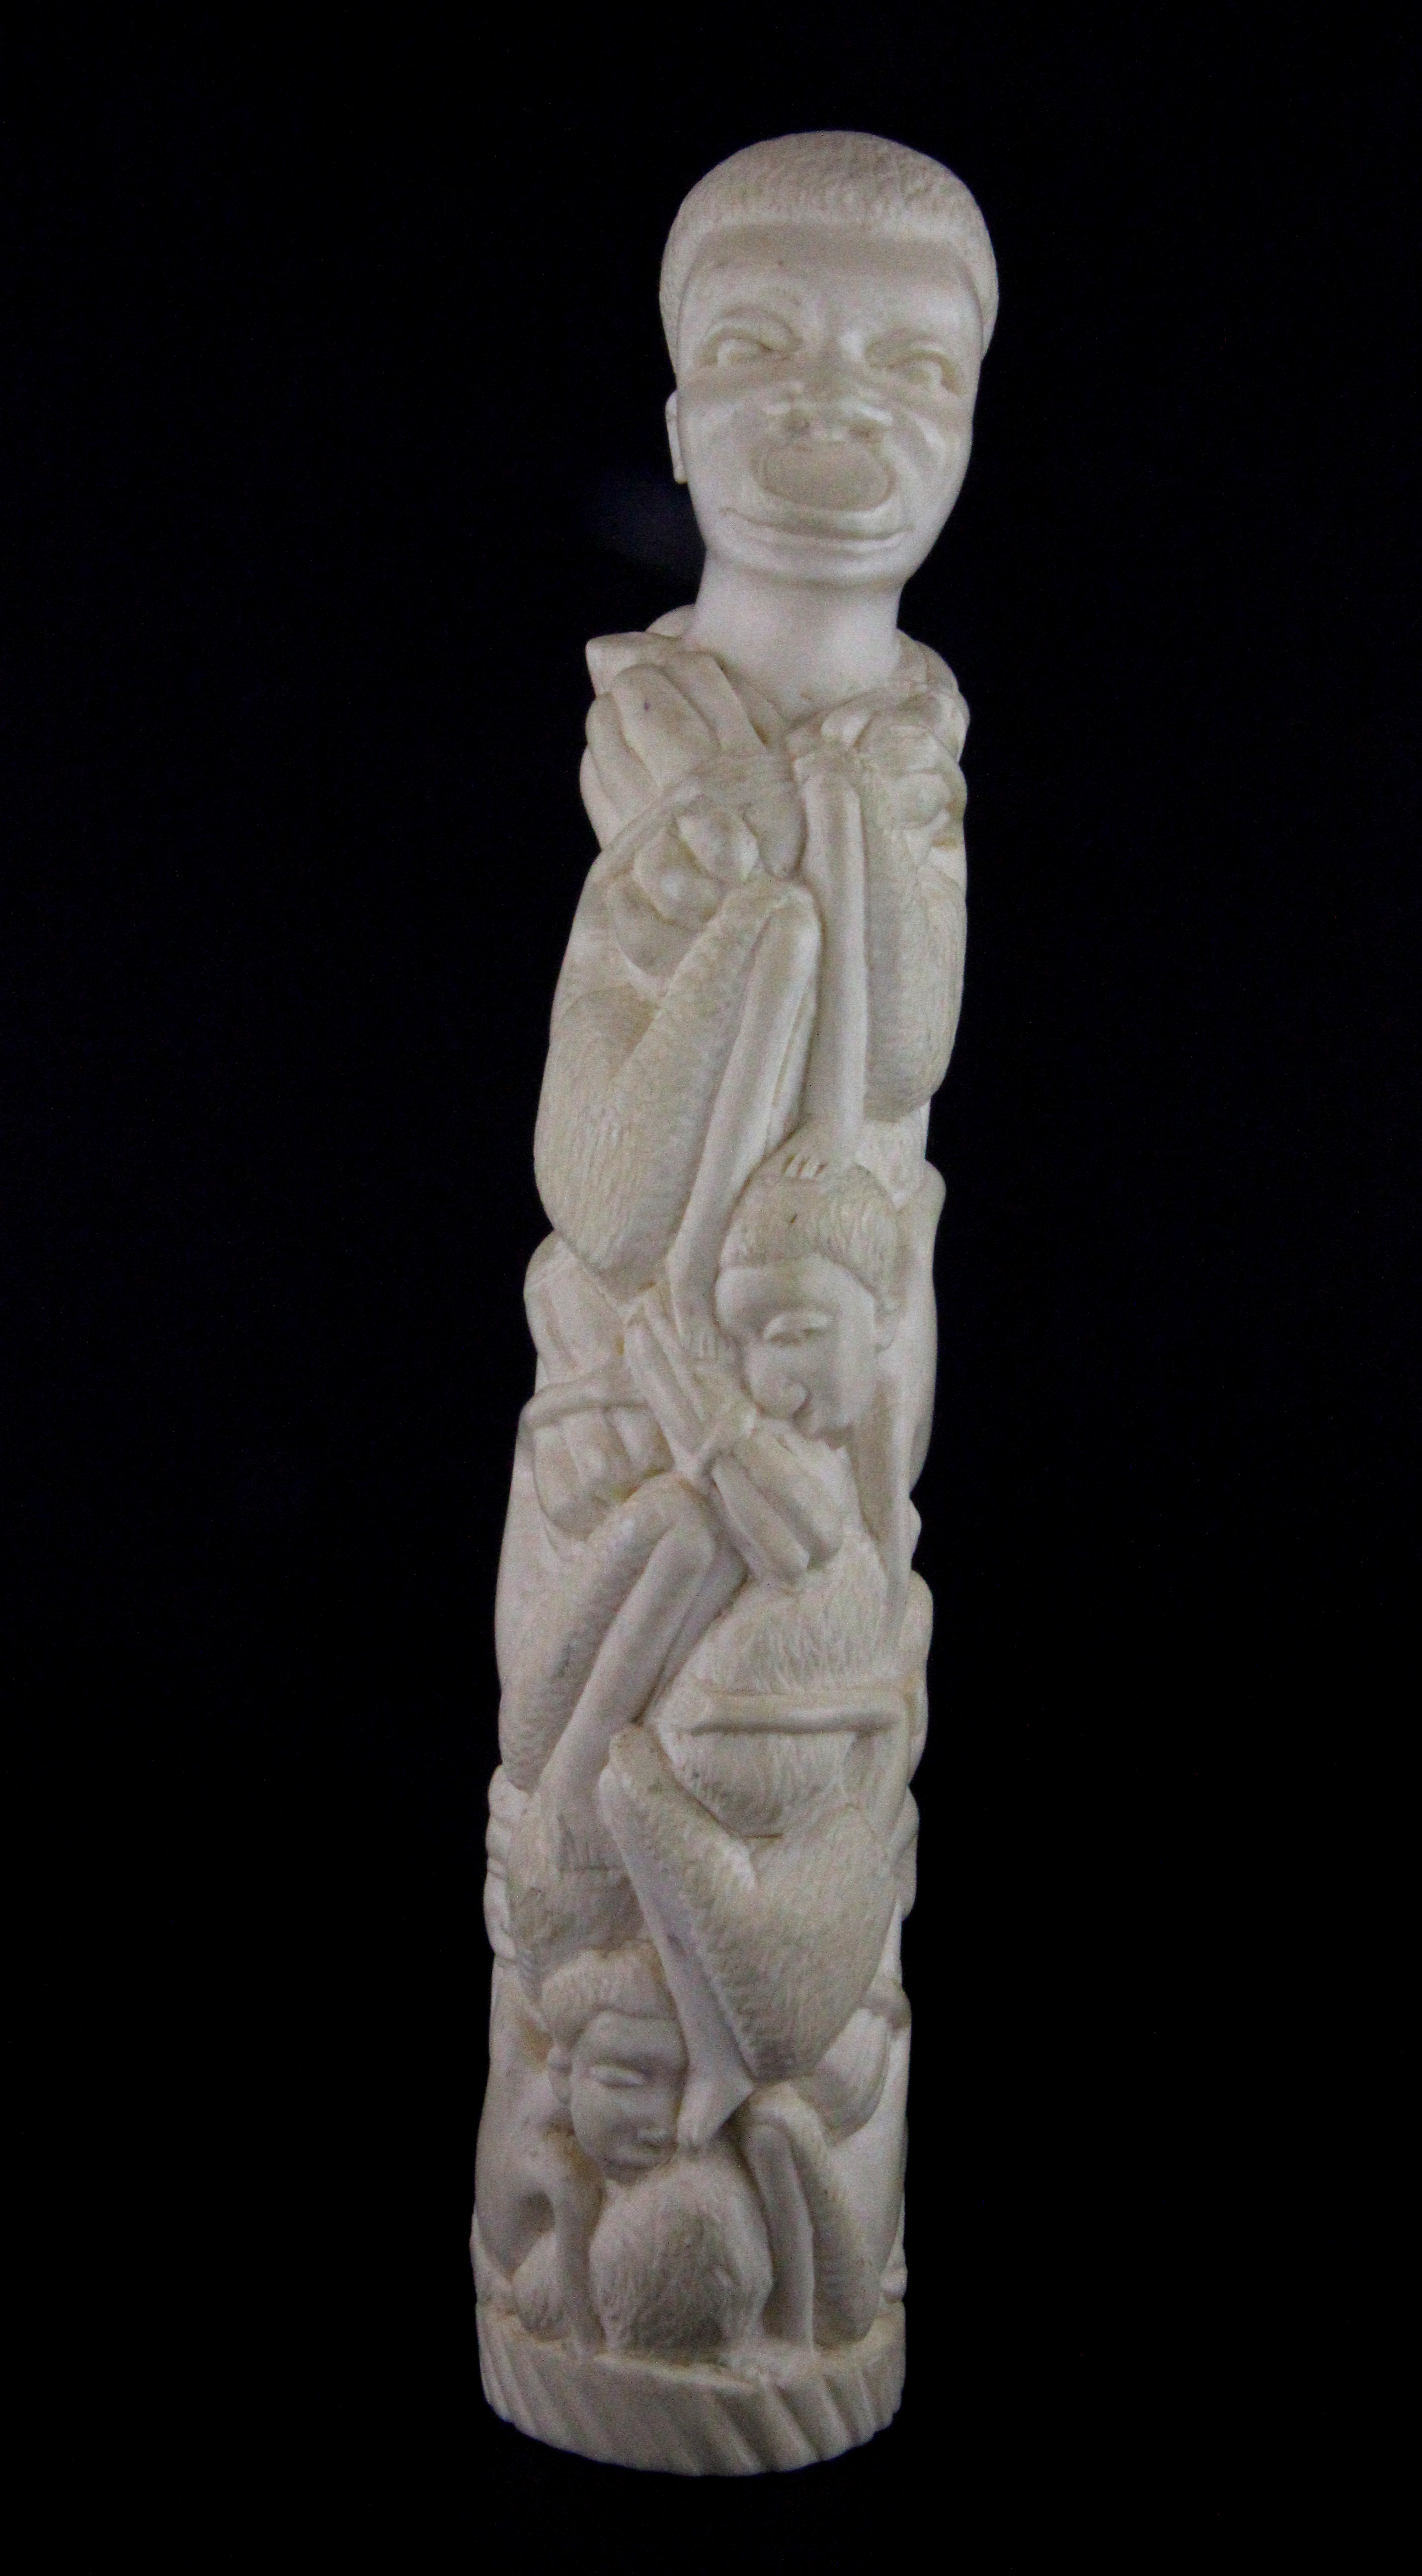 An early 20th Century African carved ivory tribal figure, H. 25cm.